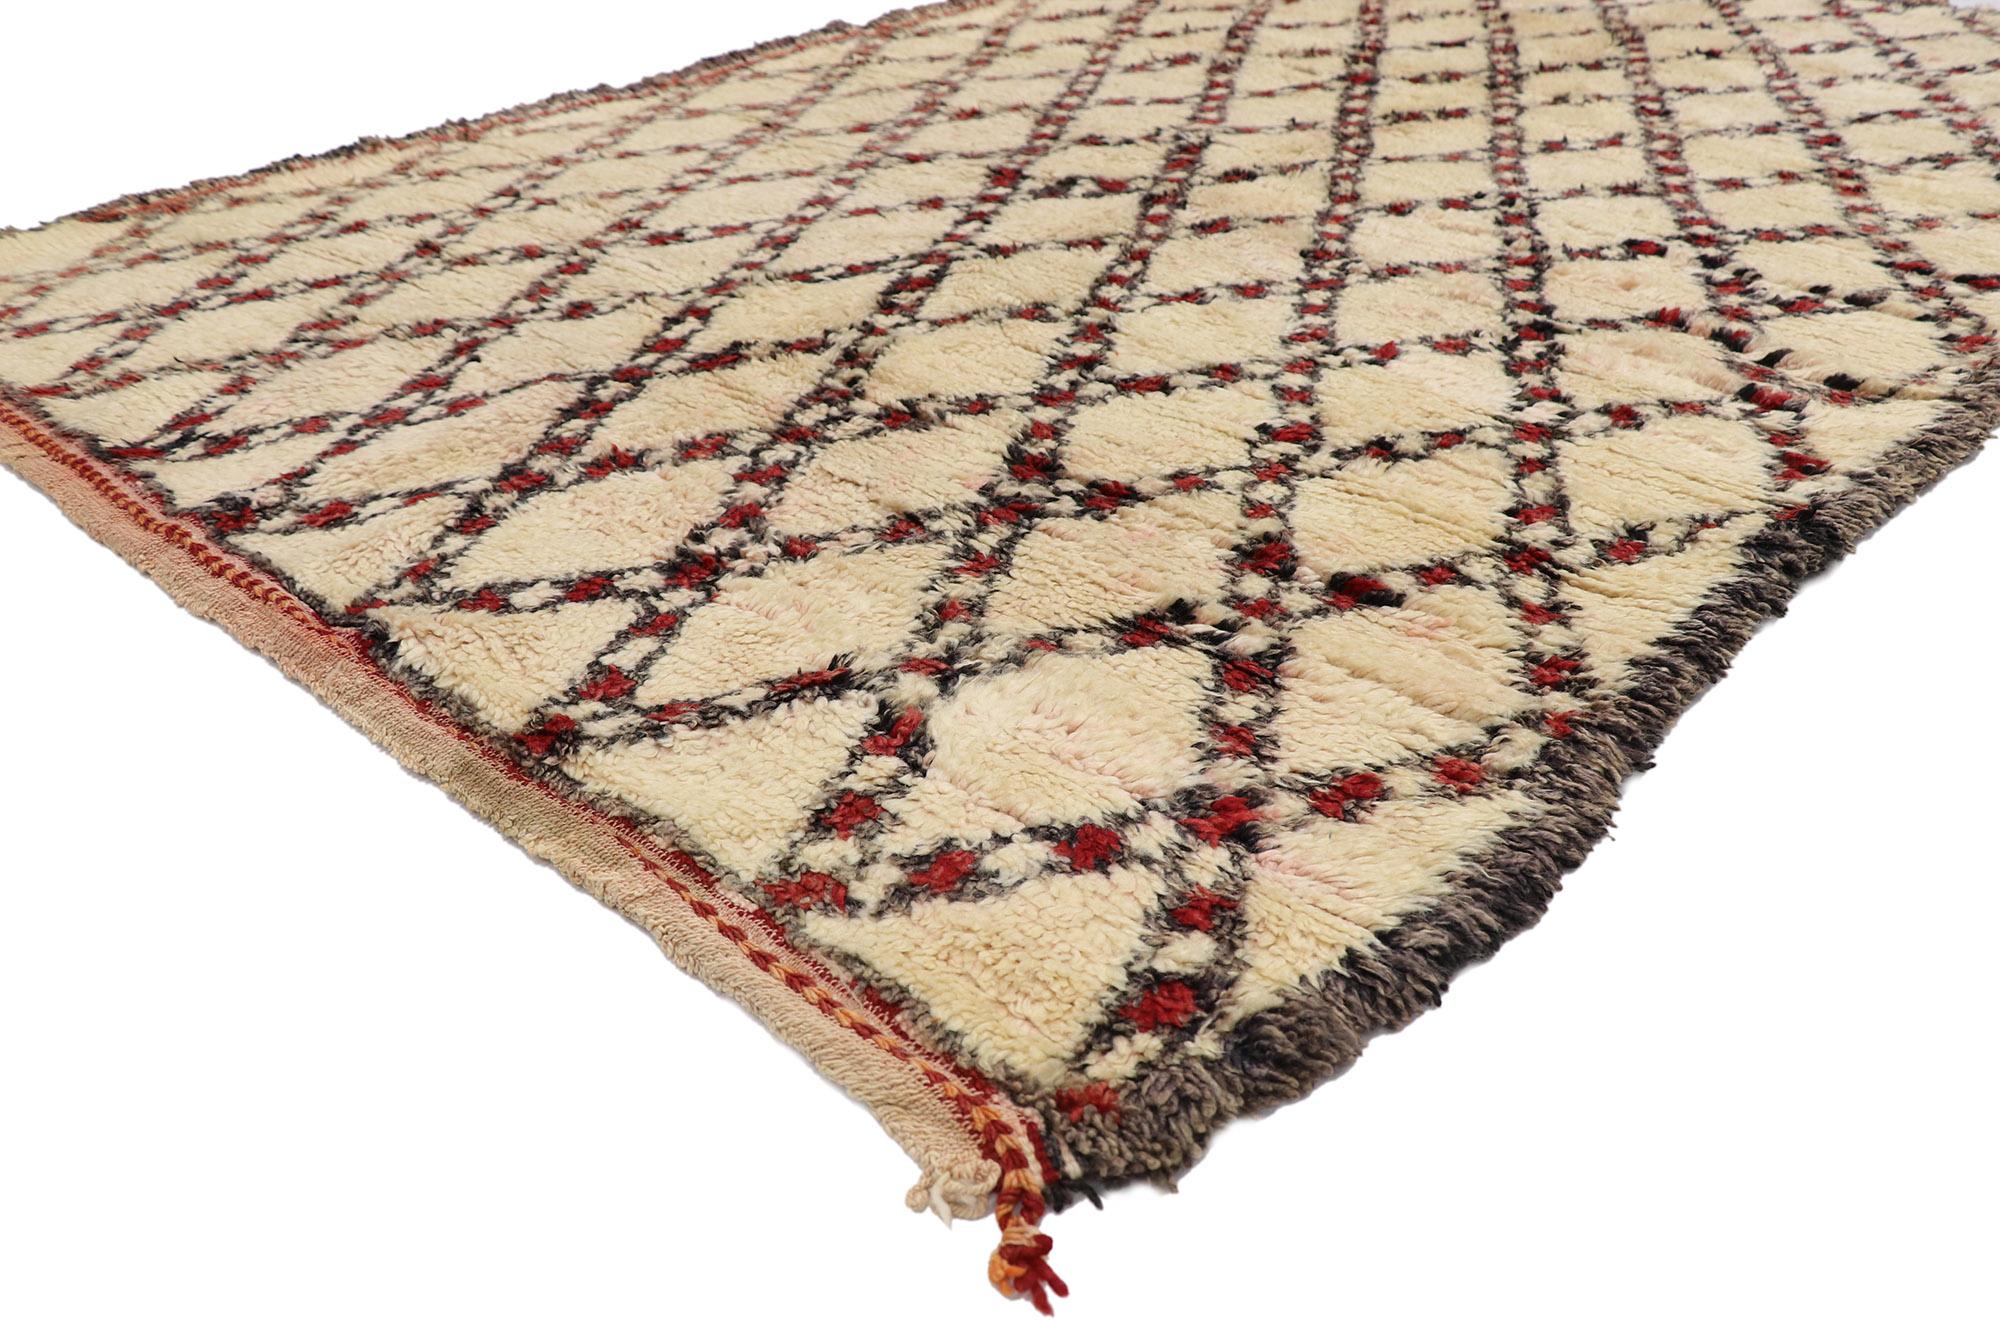 21392, vintage Berber Beni Ourain Moroccan rug with Mid-Century Modern style. With its simplicity, plush pile and Mid-Century Modern style, this hand knotted wool vintage Berber Beni Ourain Moroccan rug is a captivating vision of woven beauty. It